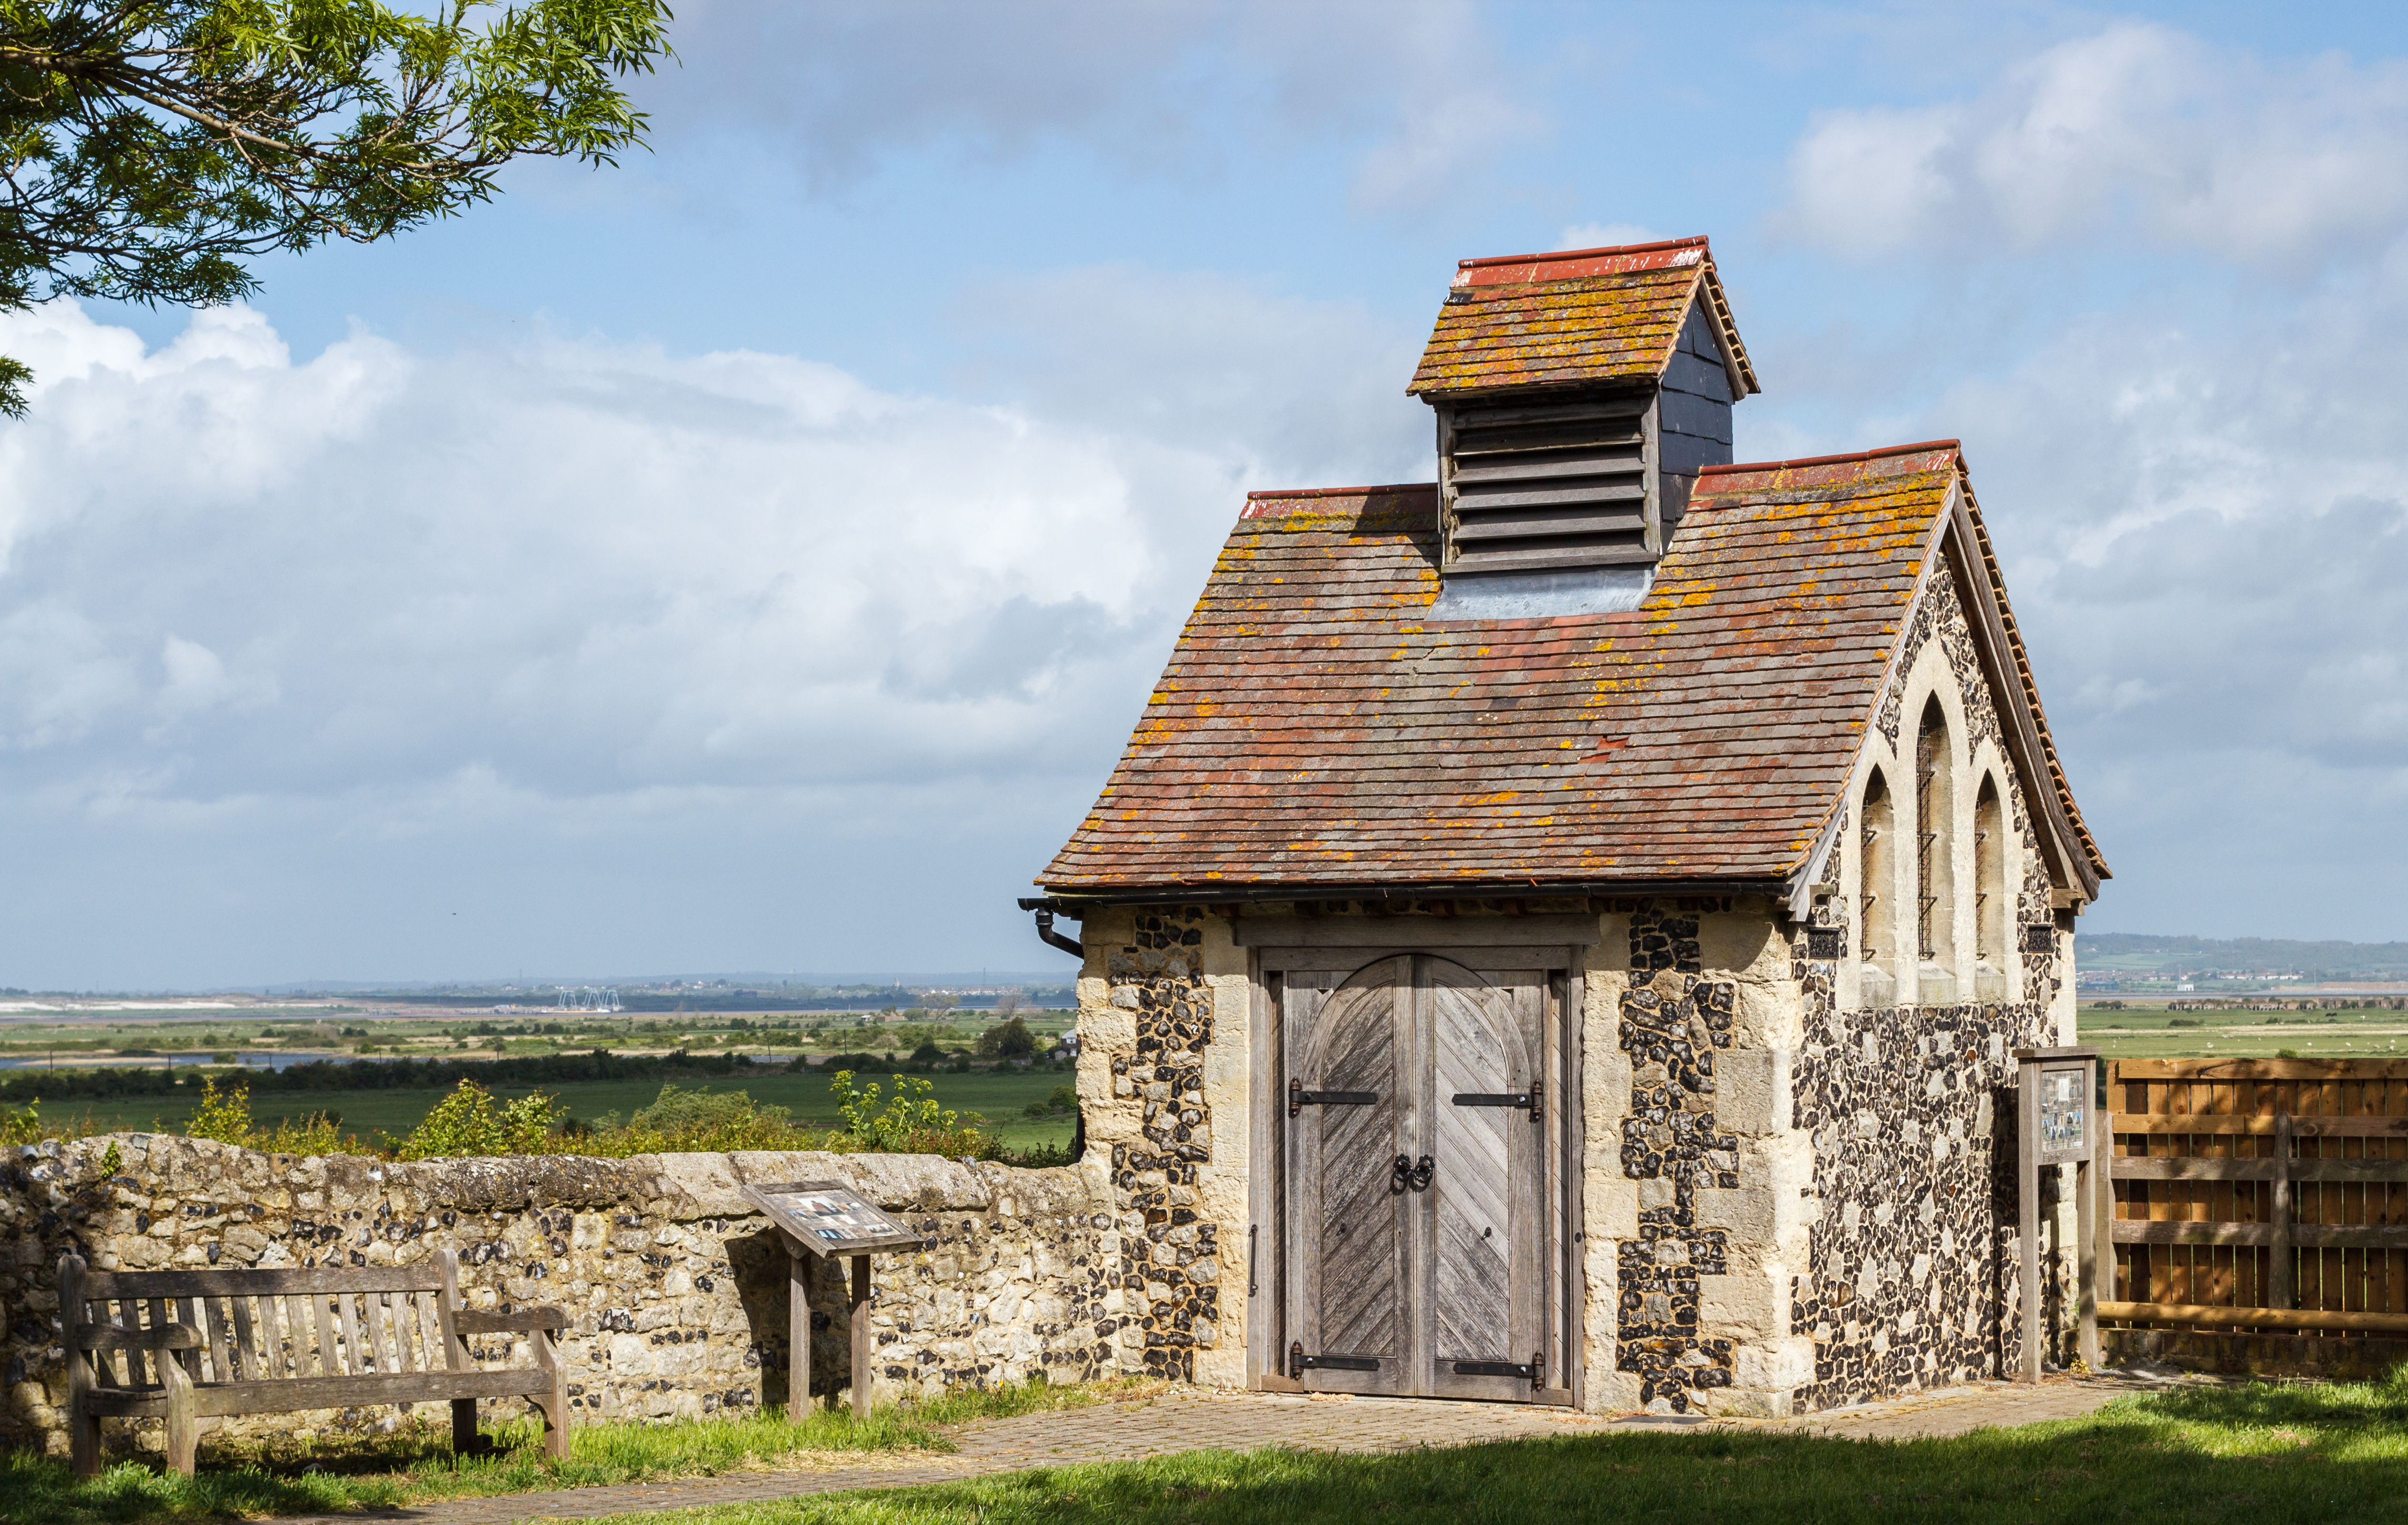 Charnel House at St Helens Church, Cliffe, Kent, England, 2015-05-06-5136